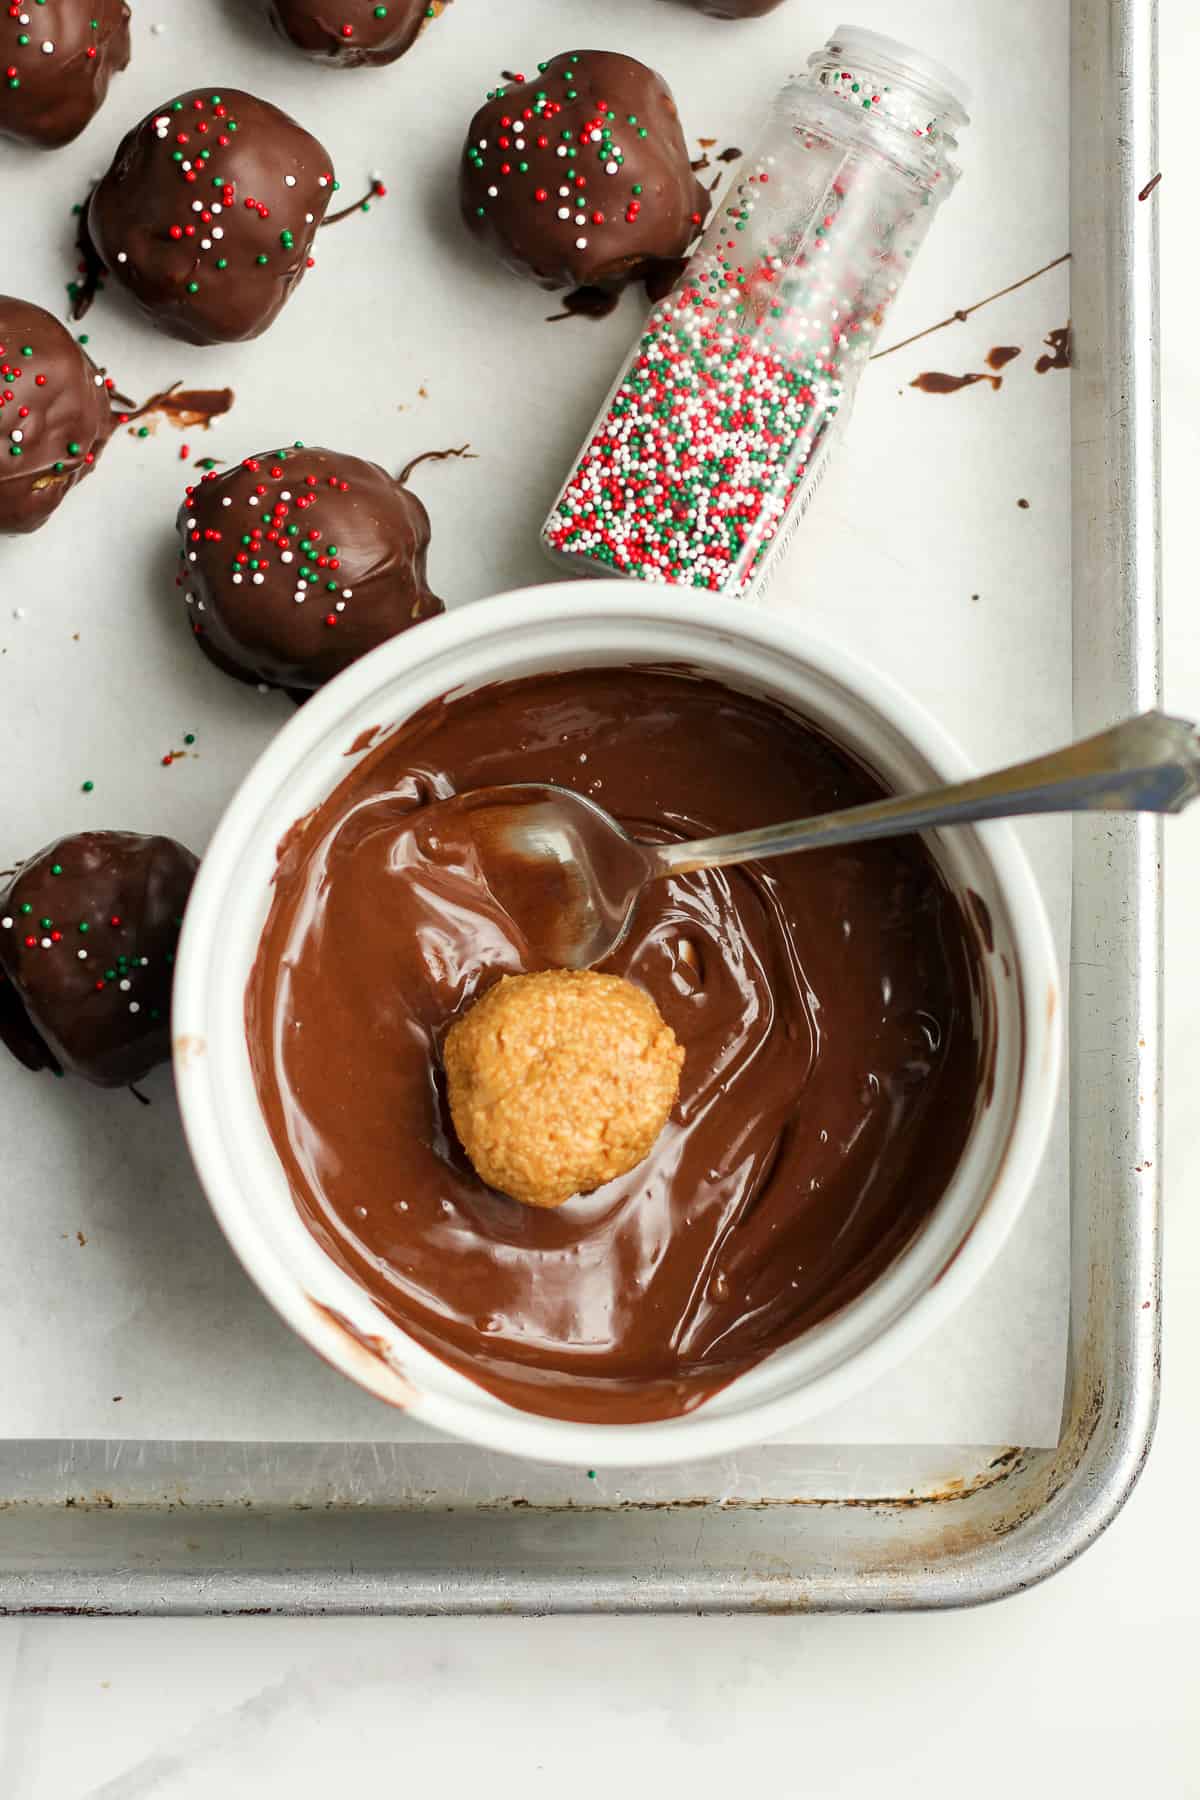 A bowl of the melted chocolate with a peanut butter ball inside.